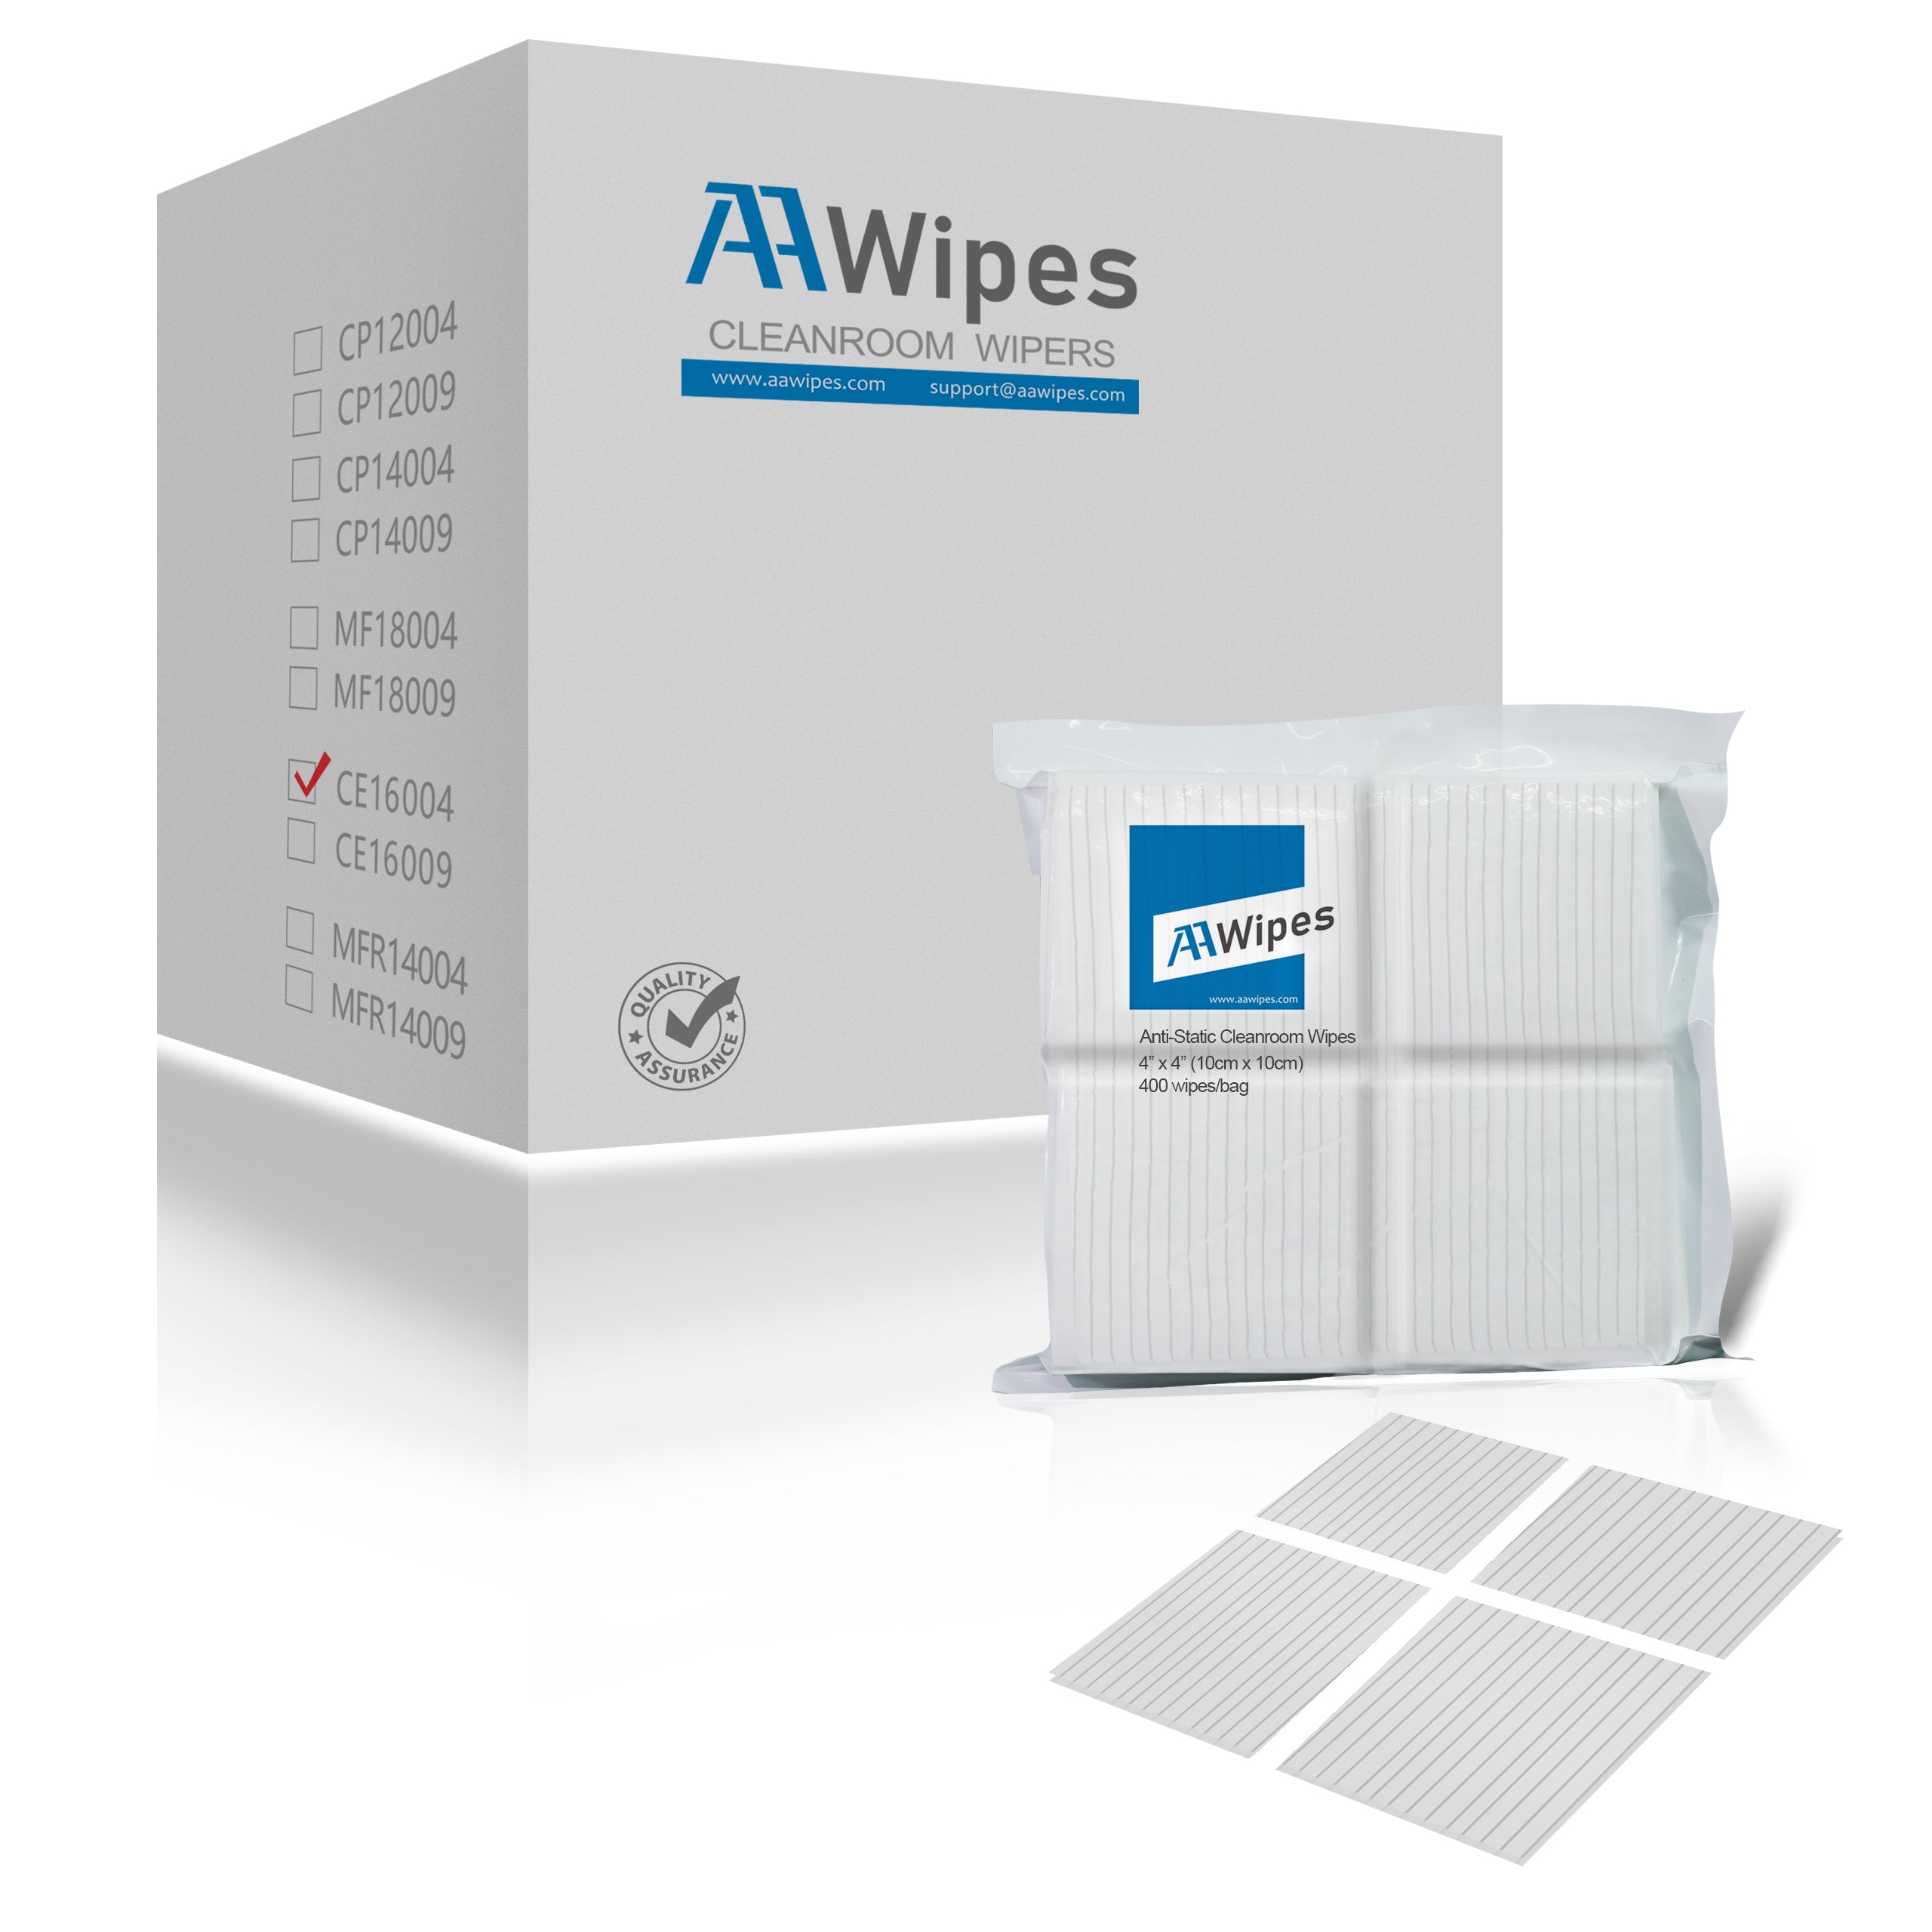 AAwipes Material: High-Quality Anti-Static Cleanroom Wipers made from virgin polyester with conductive carbon yarns, designed to dissipate electrical charges effectively, ideal for sensitive processes.